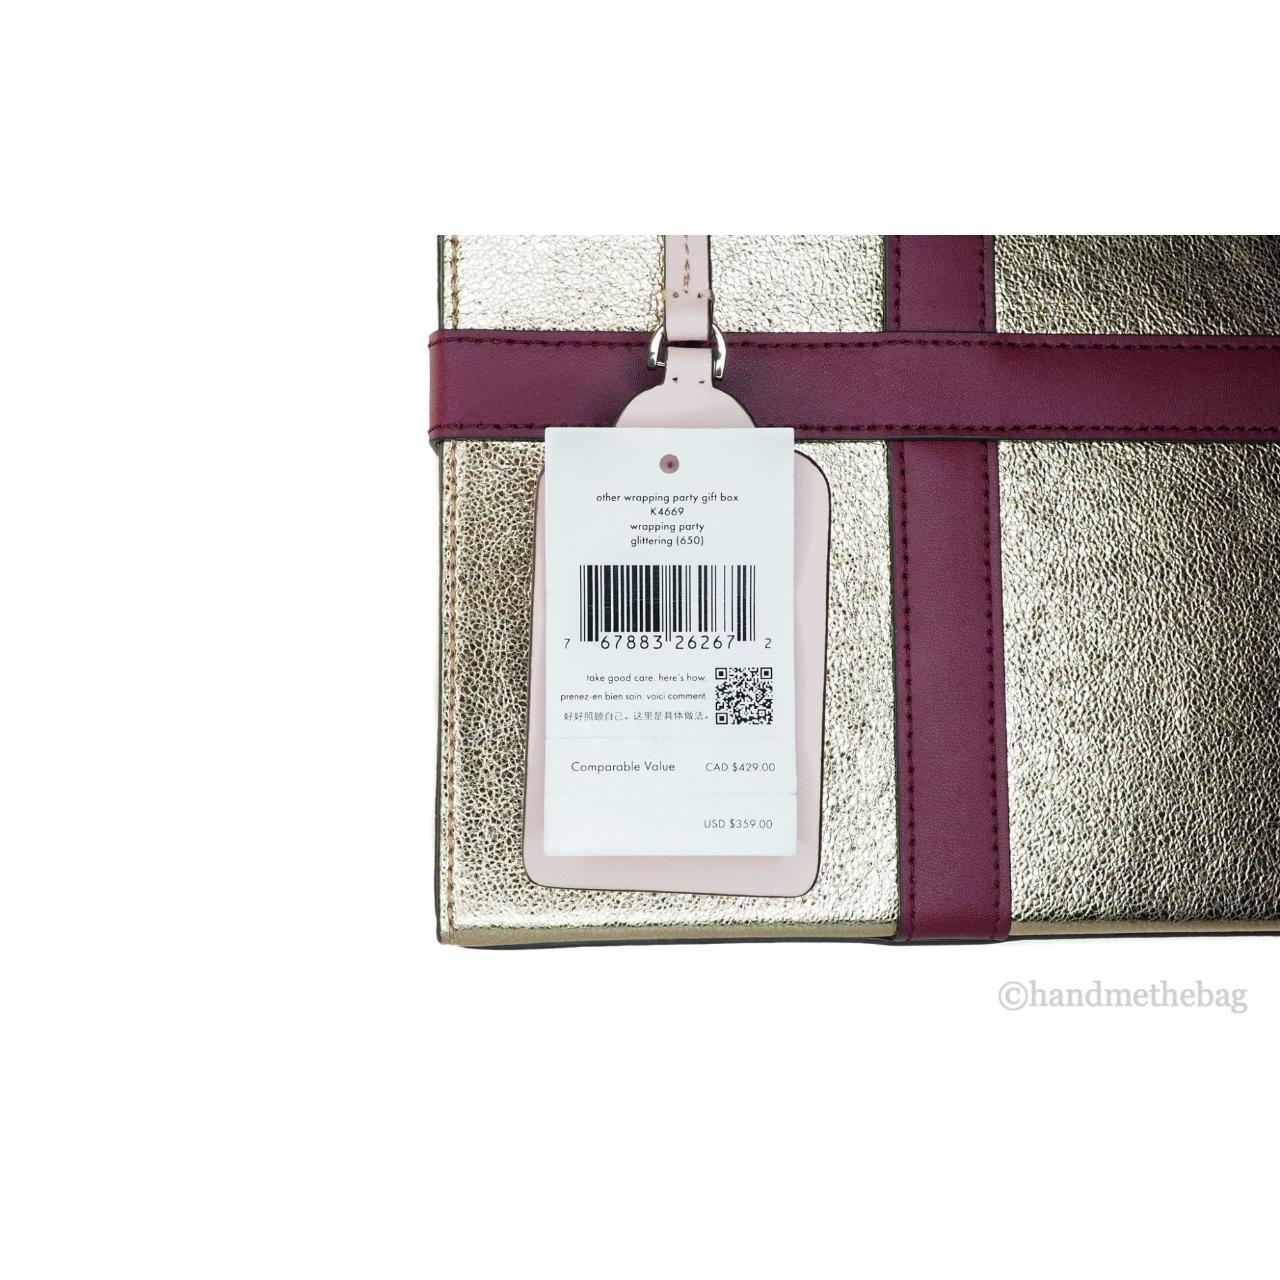 Kate Spade New York Wrapping Party Gift Box Crossbody Women's